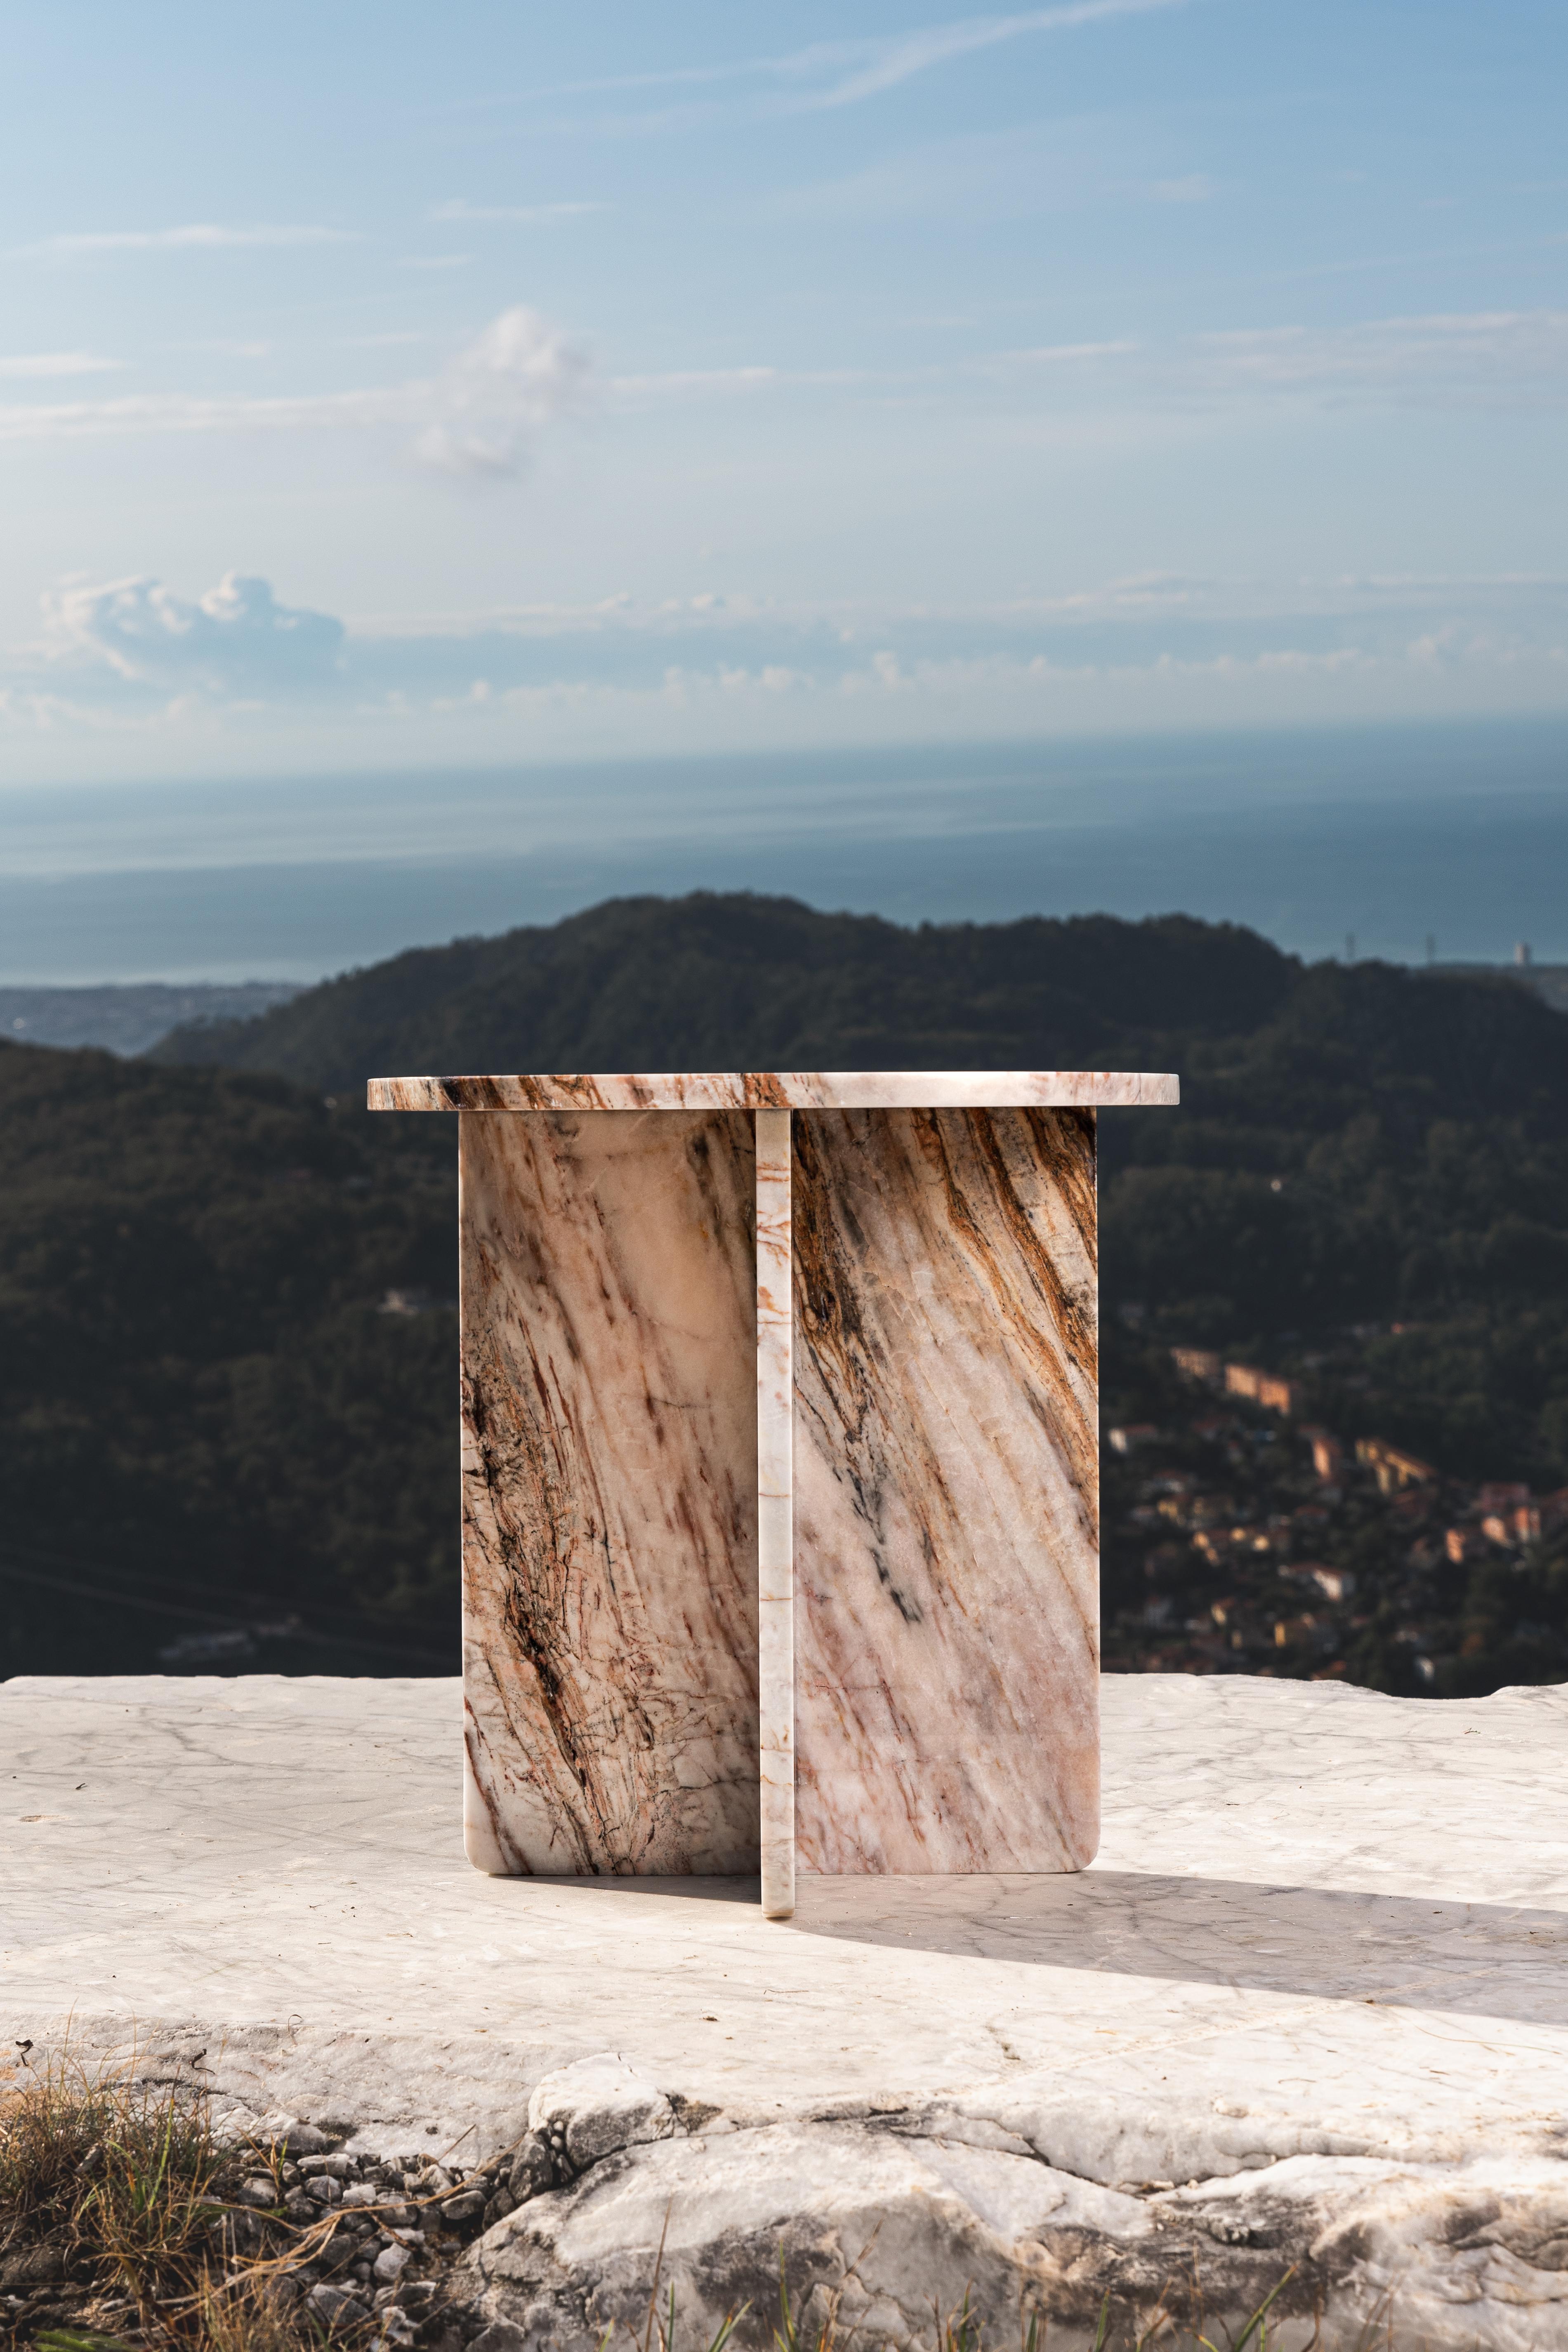 Tara marble side table by Edition Club
Edition 6 of 6
Dimensions: L 51 x W 45.7 x H 48 cm
Materials: Tarahumara marble from Latin America

Edition/Club is born from an environmental consciouness of reducing waste generated from the stone